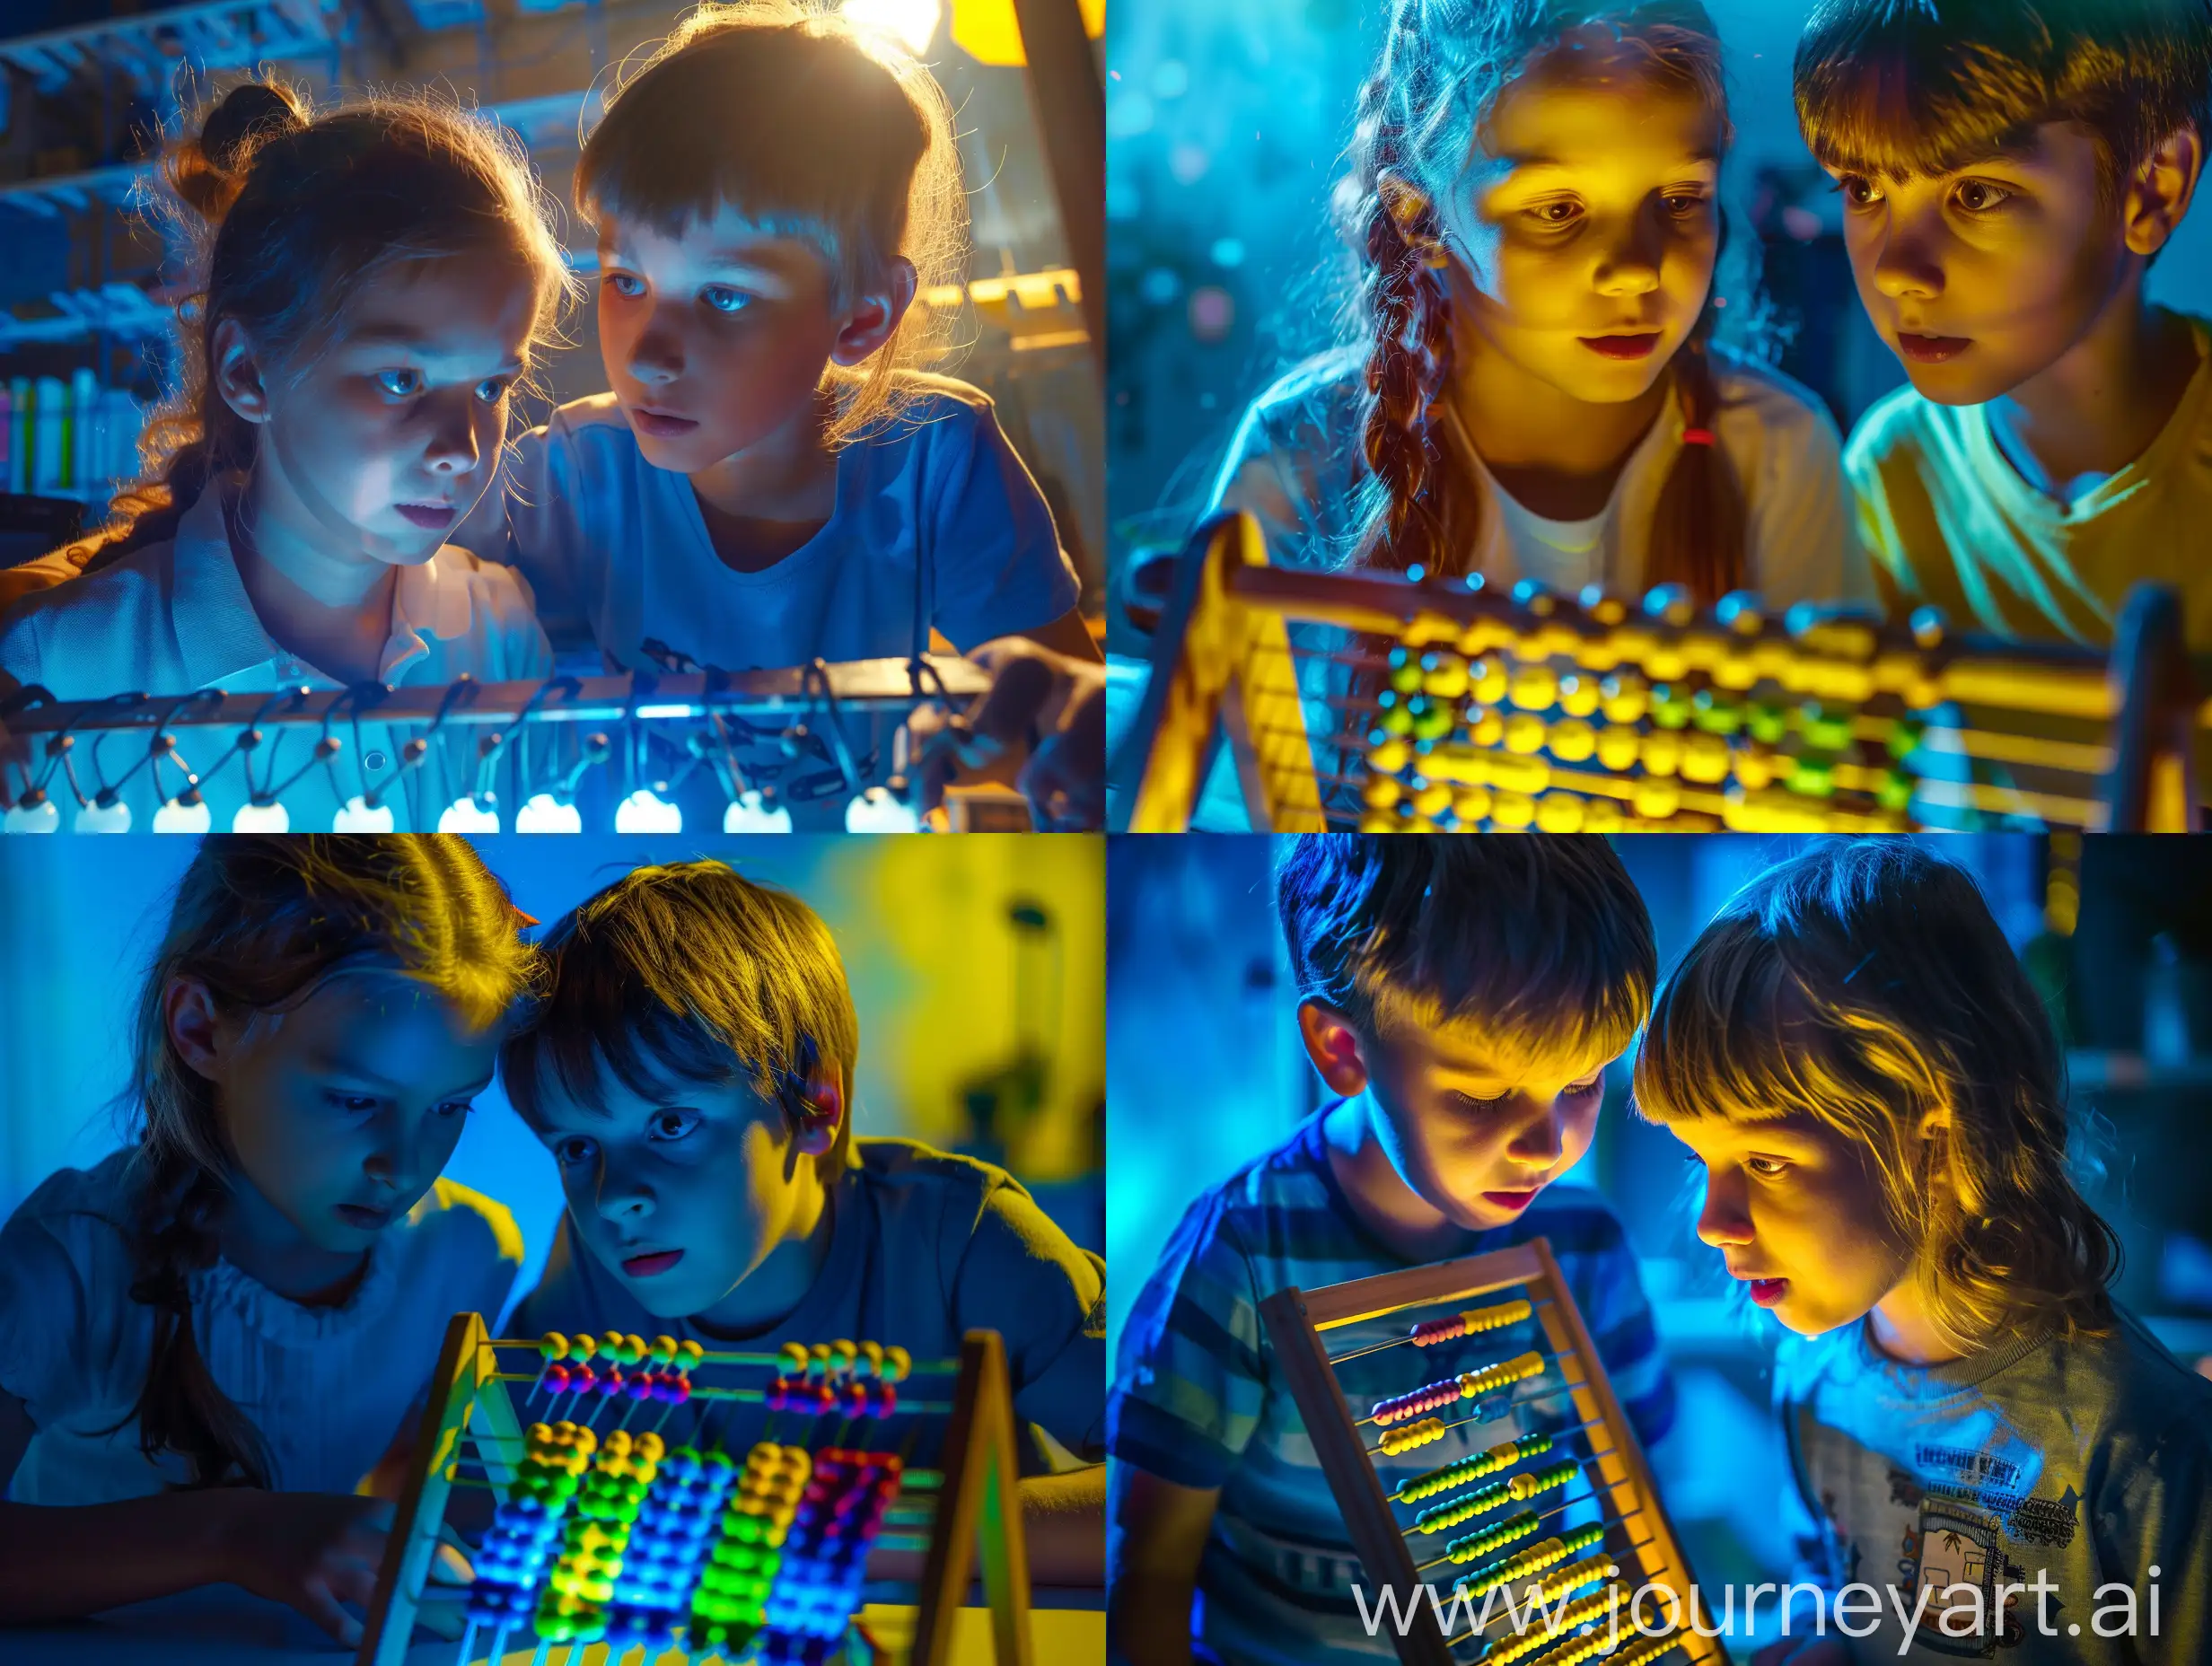 Four-Children-at-Eight-Years-Old-Engaged-in-Abacus-Math-Under-Cinematic-Blue-and-Yellow-Light